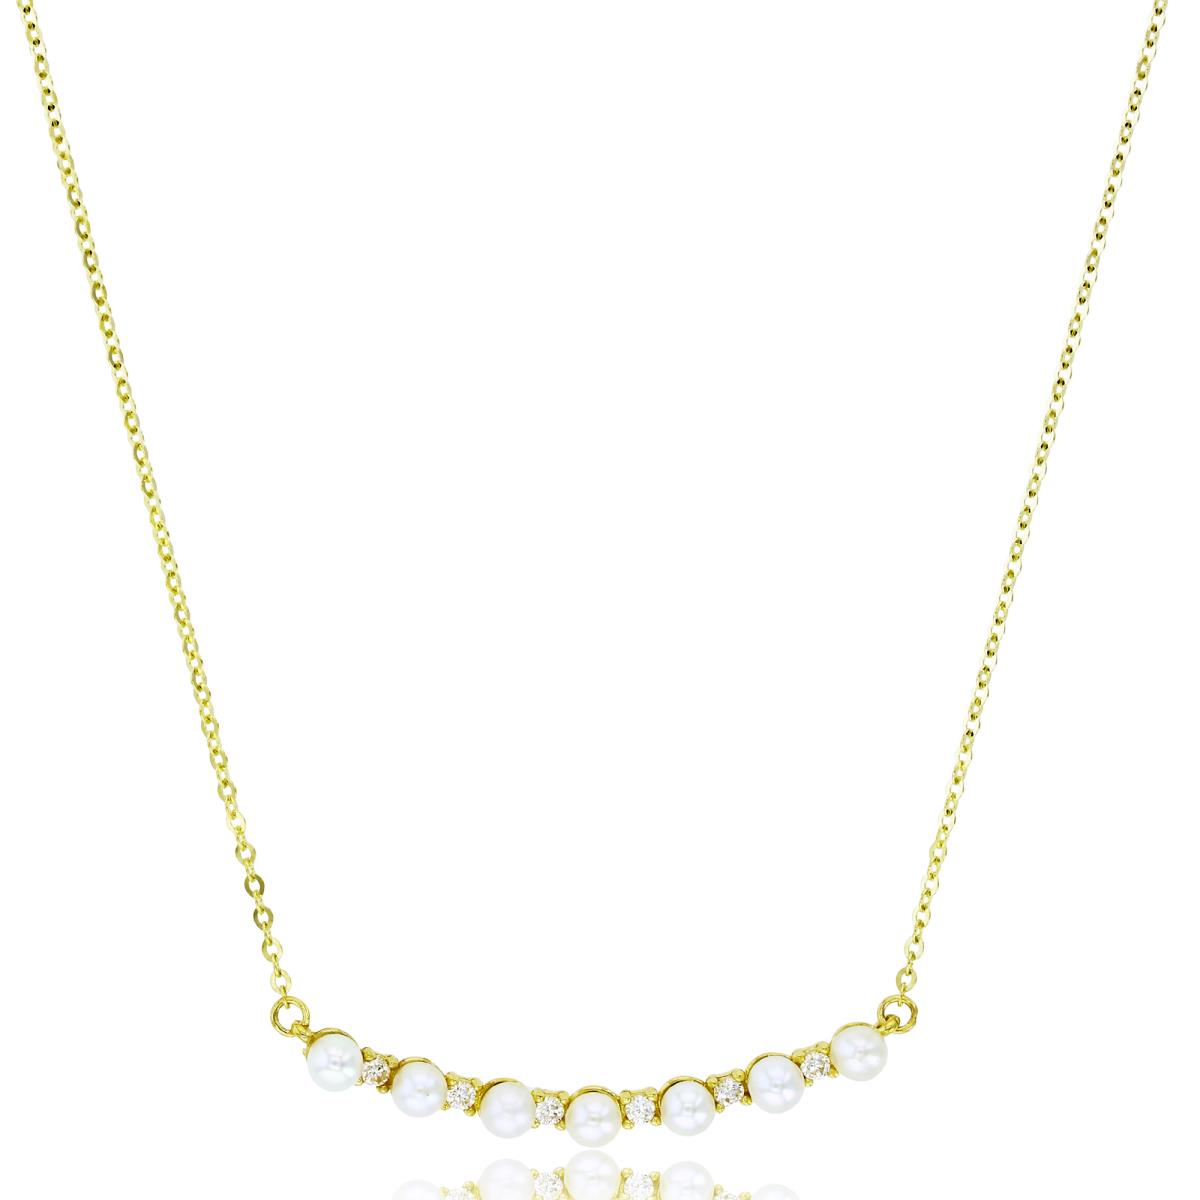 14K Yellow Gold Alternate 3mm Rnd Pearl & White CZ 17+1" Smile Necklace